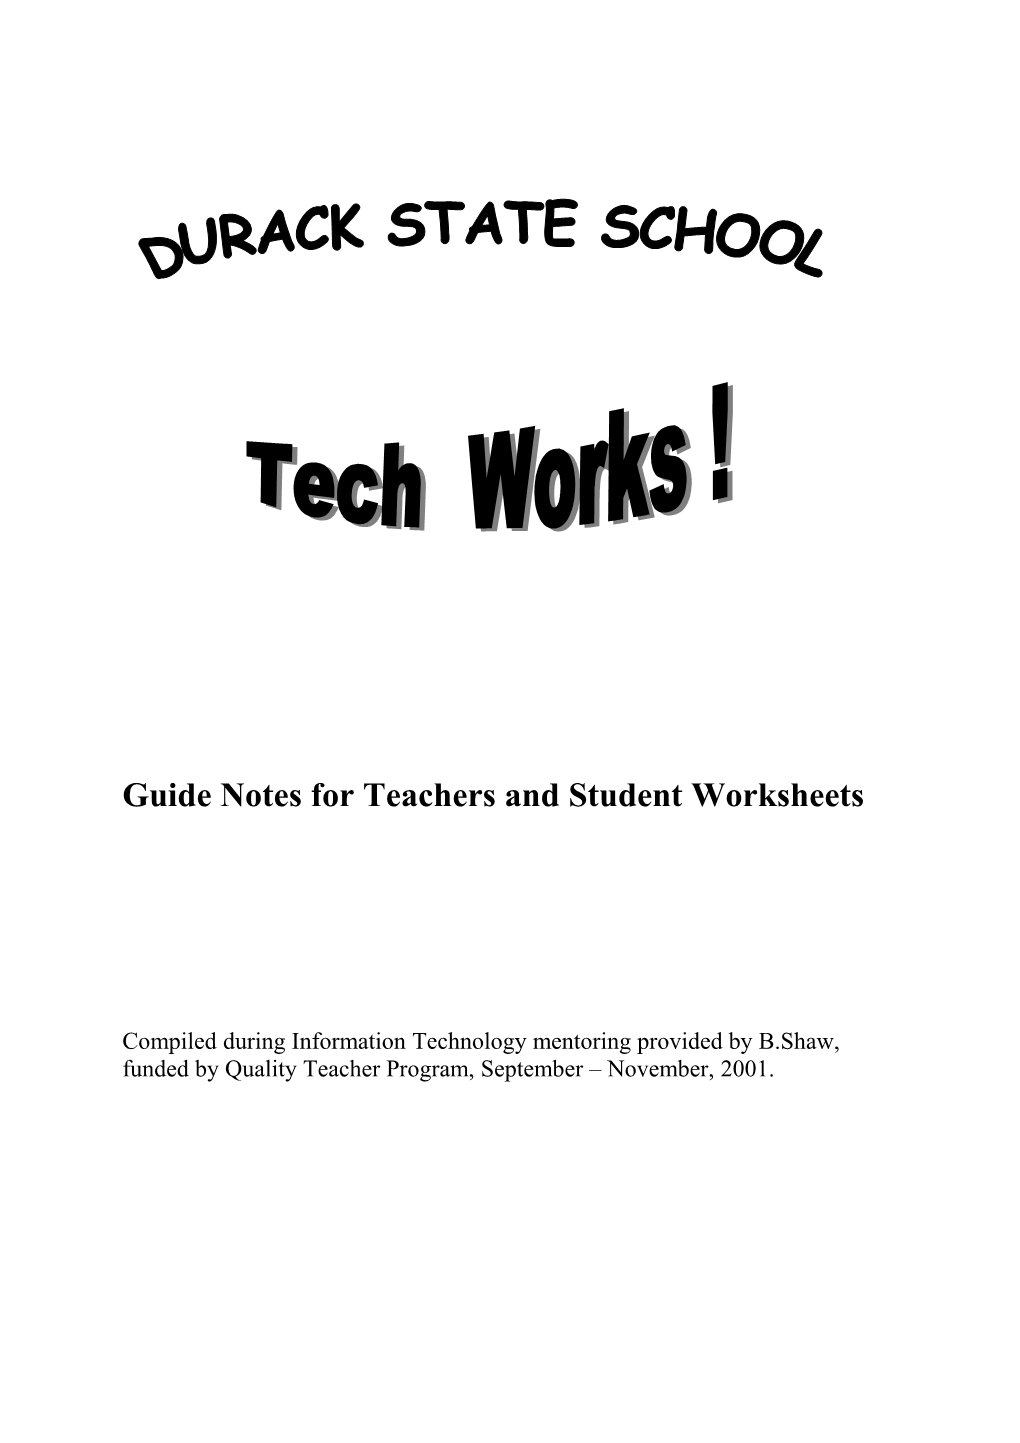 Guide Notes for Teachers and Student Worksheets